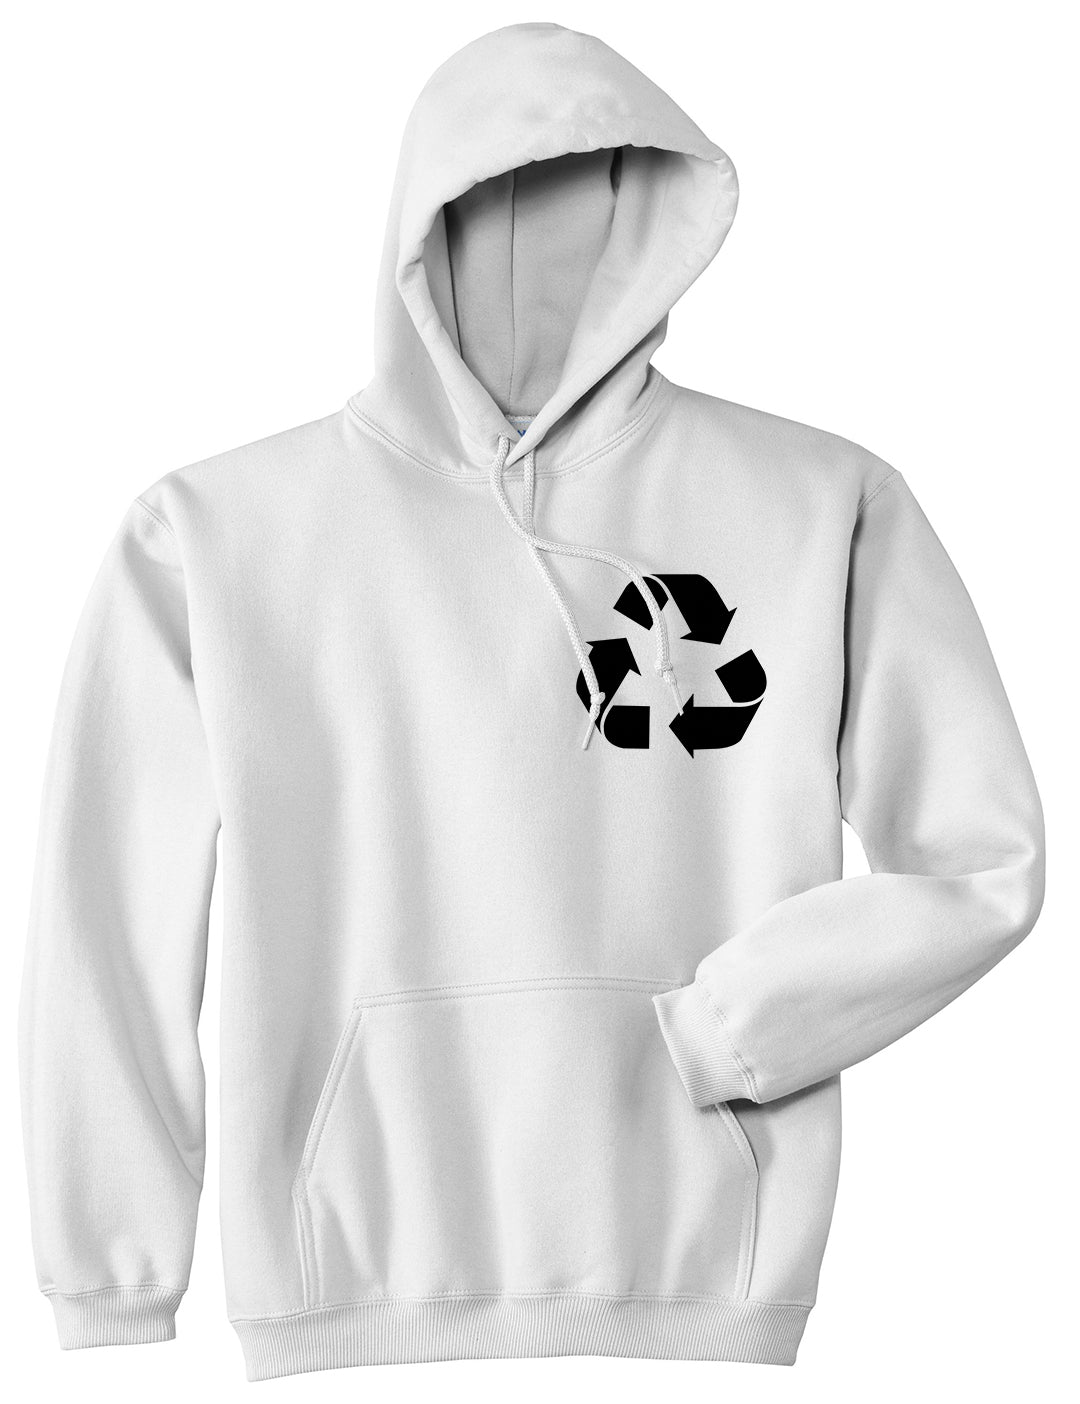 Recylce Logo Chest White Pullover Hoodie by Kings Of NY